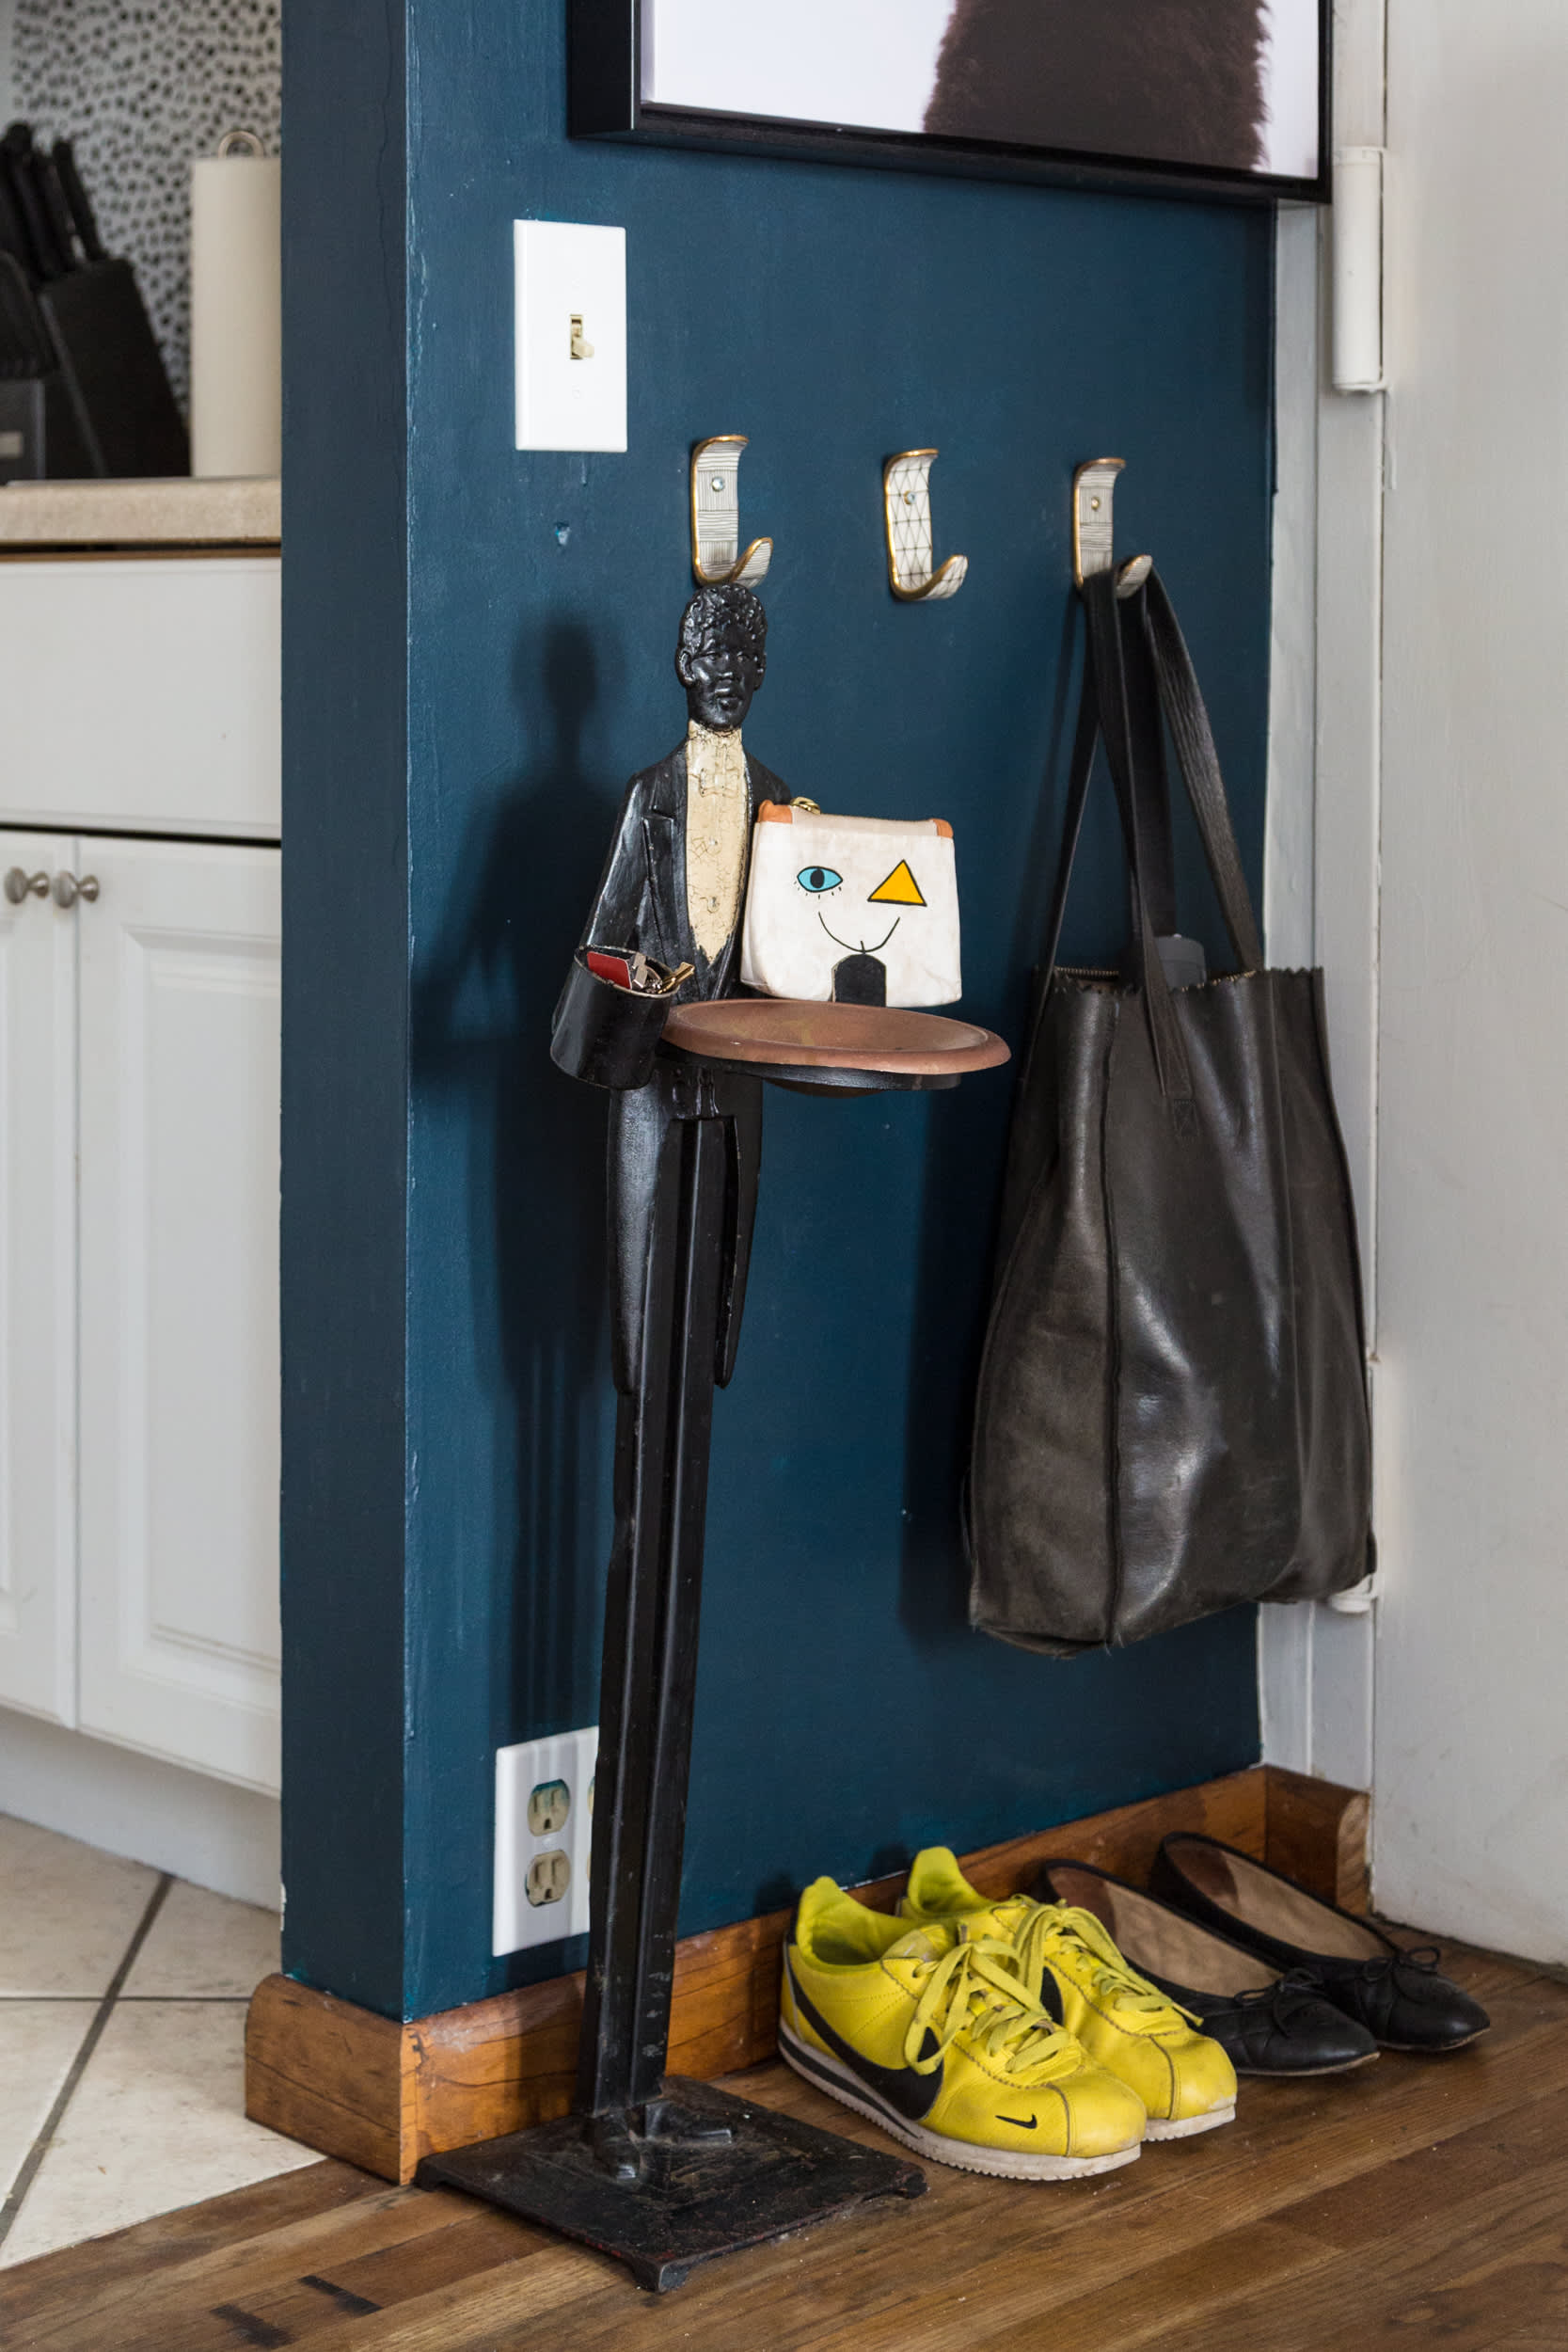 23 Clever Small Space Storage Solutions 